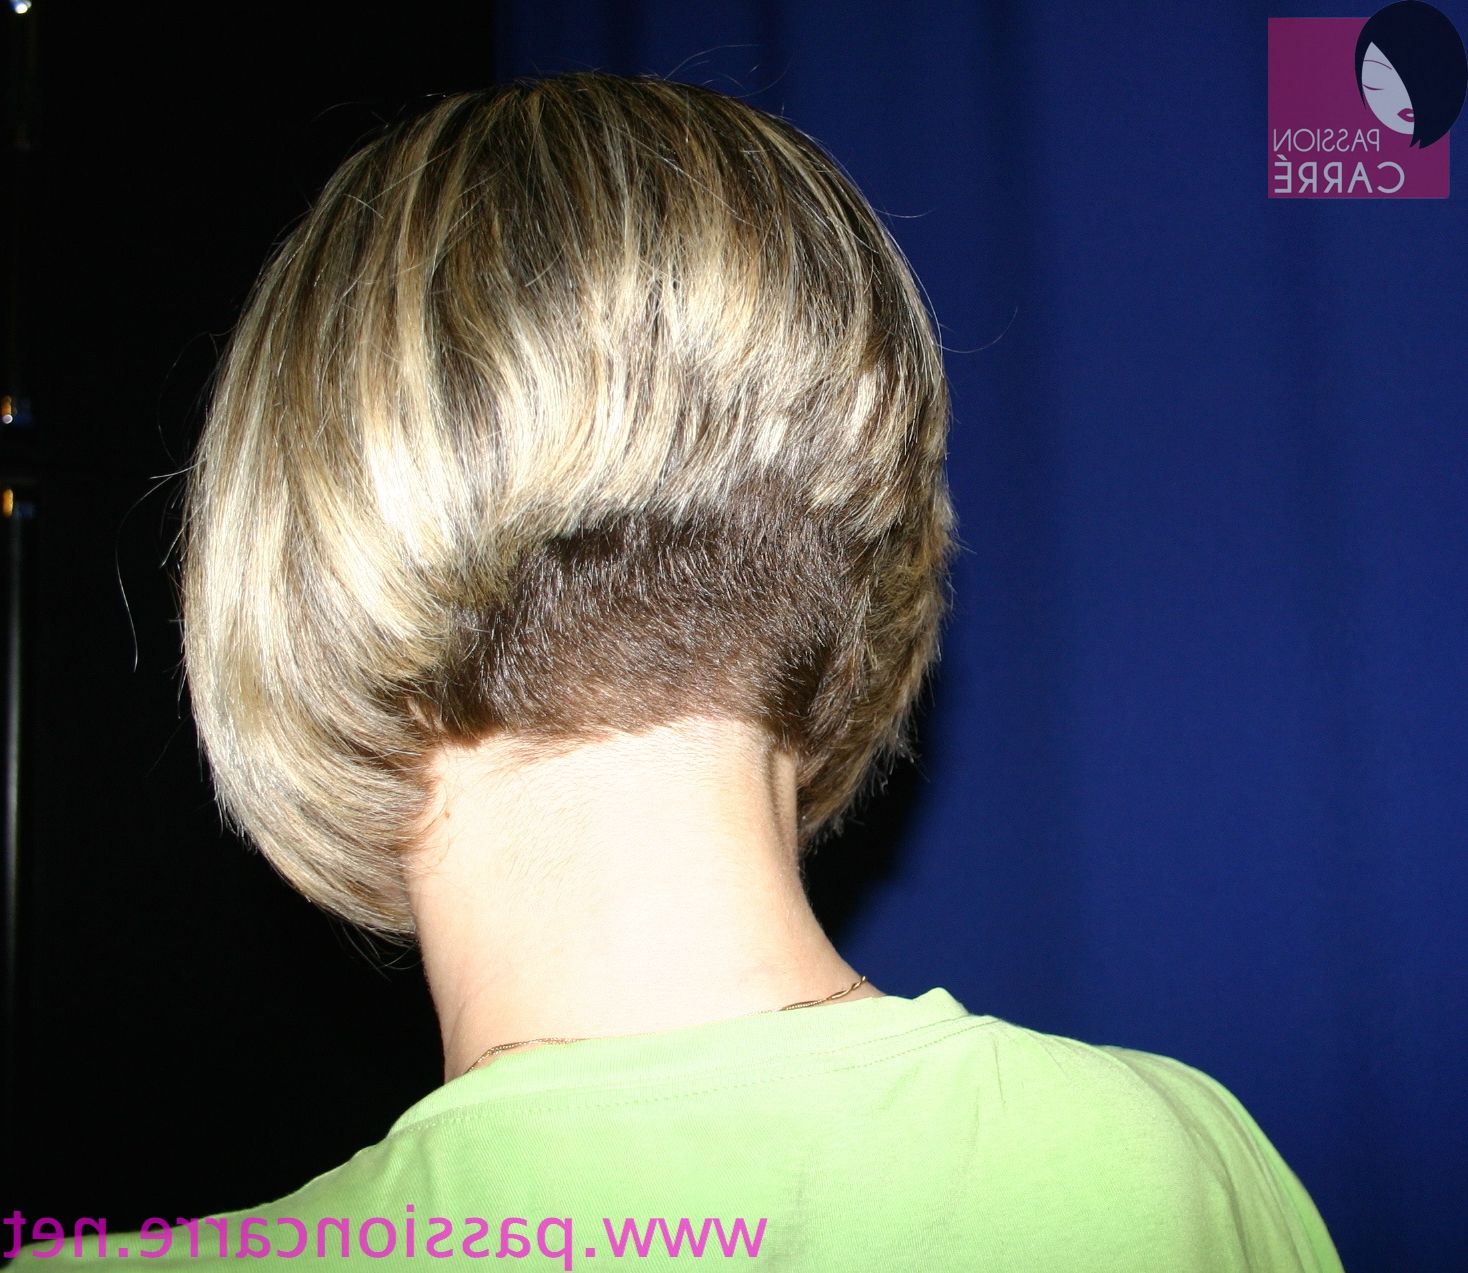 Short Hairstyles Back View Inverted Bob – Hairstyle For Women & Man Throughout Inverted Bob Short Haircuts (View 17 of 25)